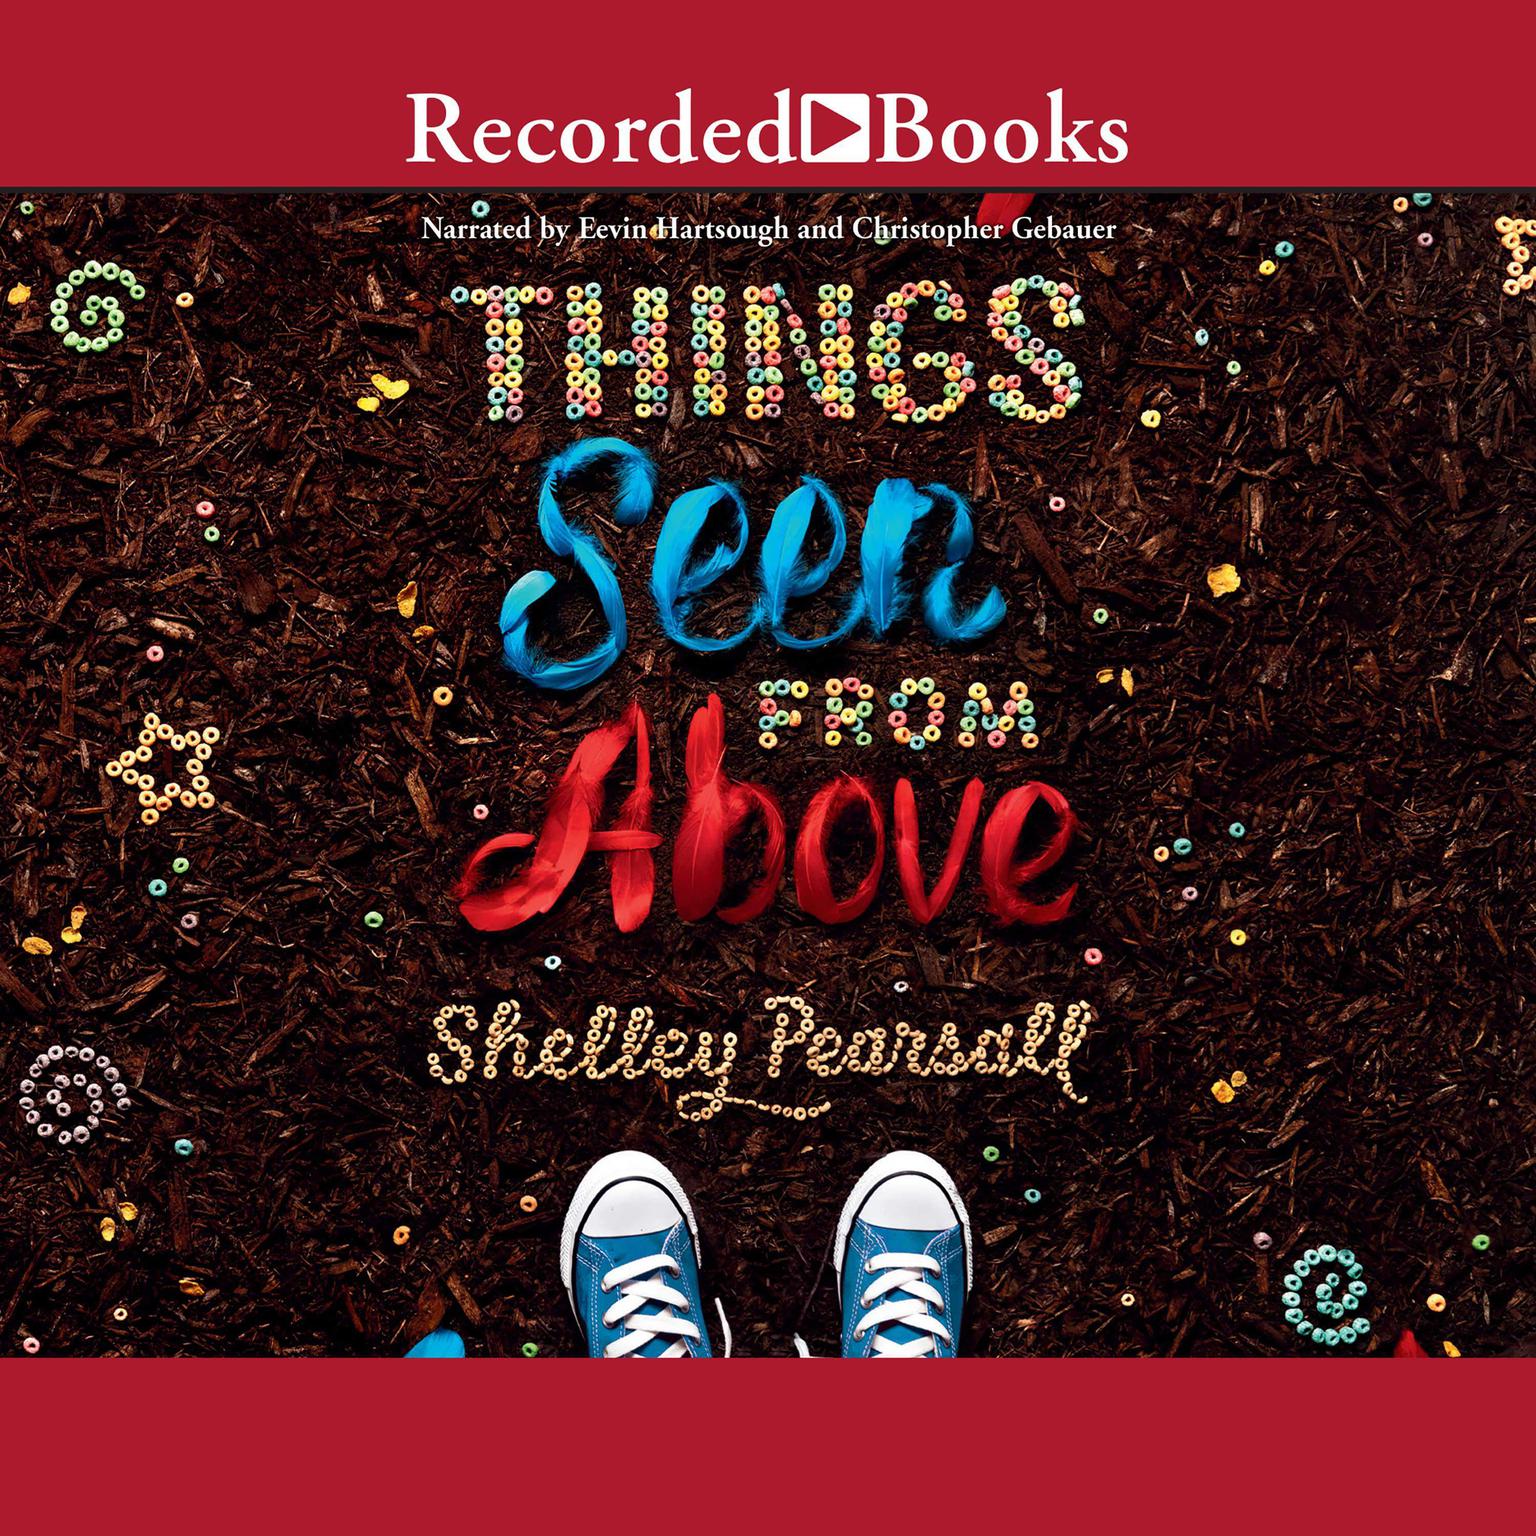 Things Seen From Above Audiobook, by Shelley Pearsall